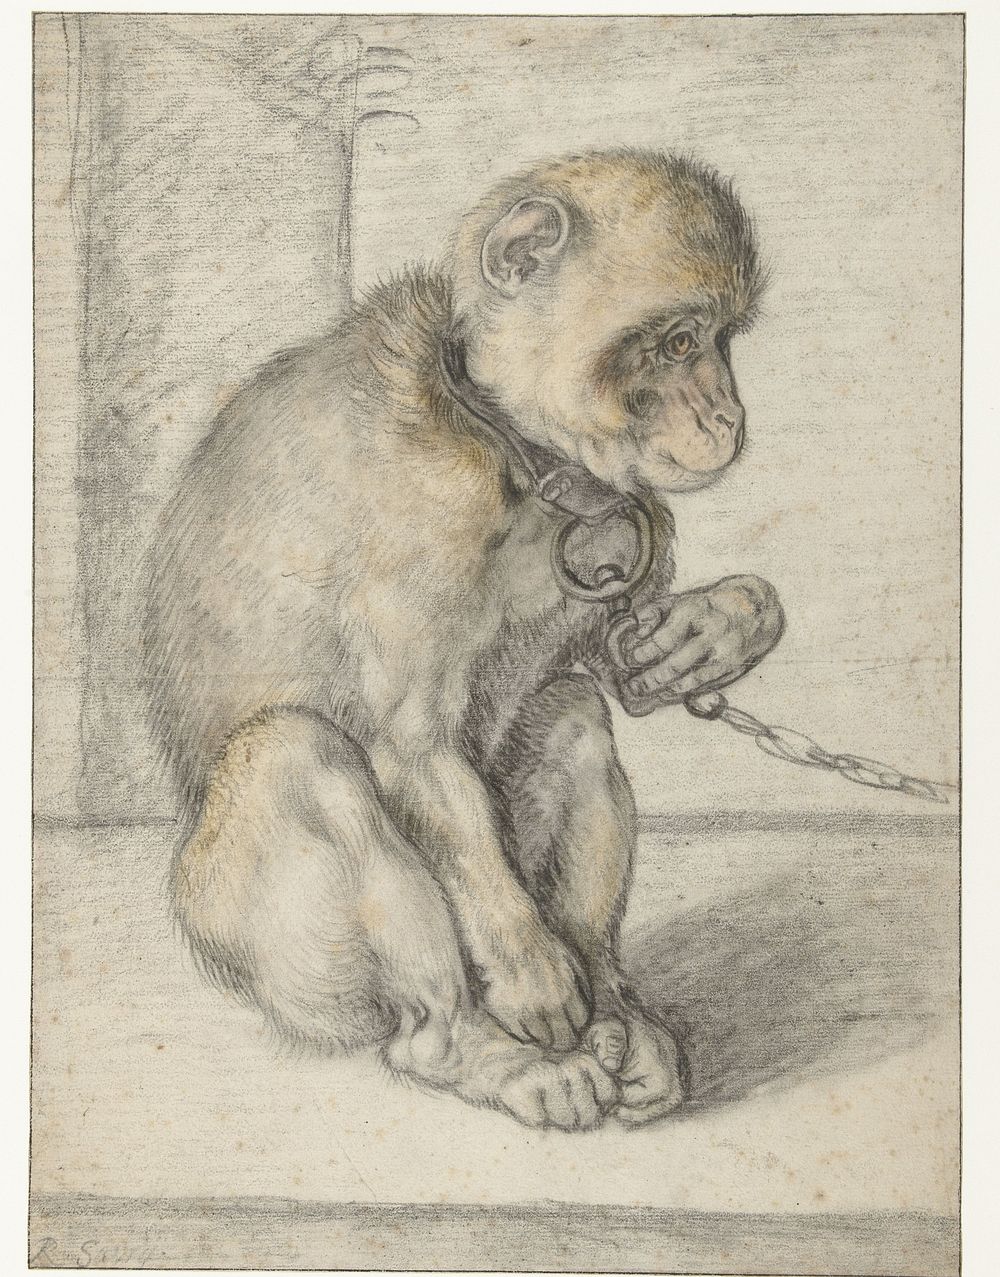 A Seated Monkey on a Chain (1592 - 1602) by Hendrick Goltzius and Roelant Savery